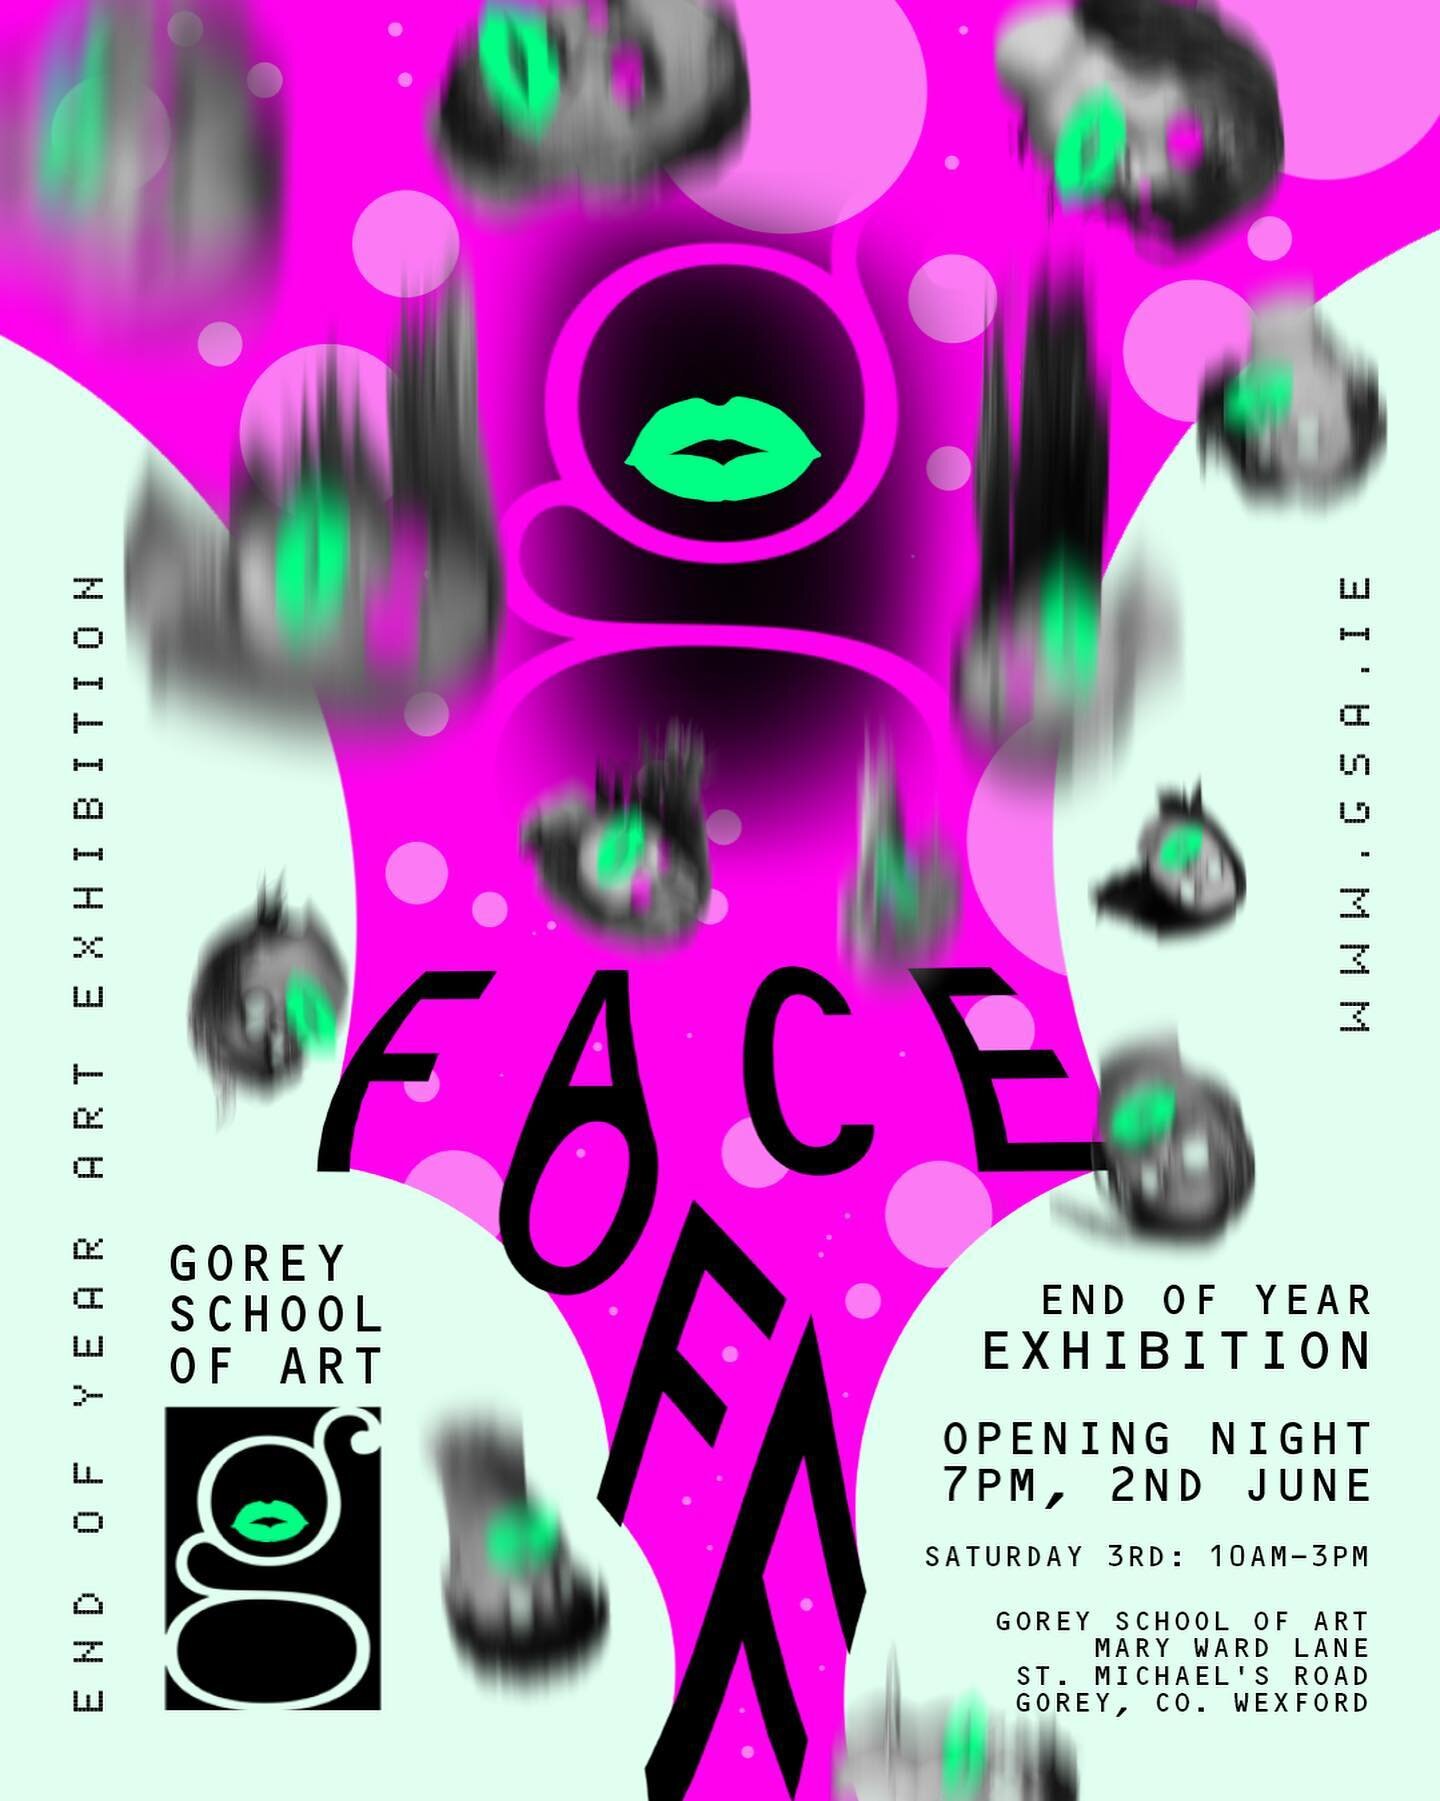 End-of-year exhibition at Gorey School of Art

Opening night: 7pm, Friday, the 2nd of June.

Open also on Saturday the 3rd of June from 10am until 3pm.

Gorey School of Art,
Mary Ward Lane
St. Michael's Road
Gorey, Co. Wexford

www.gsa.ie
info@gsa.ie